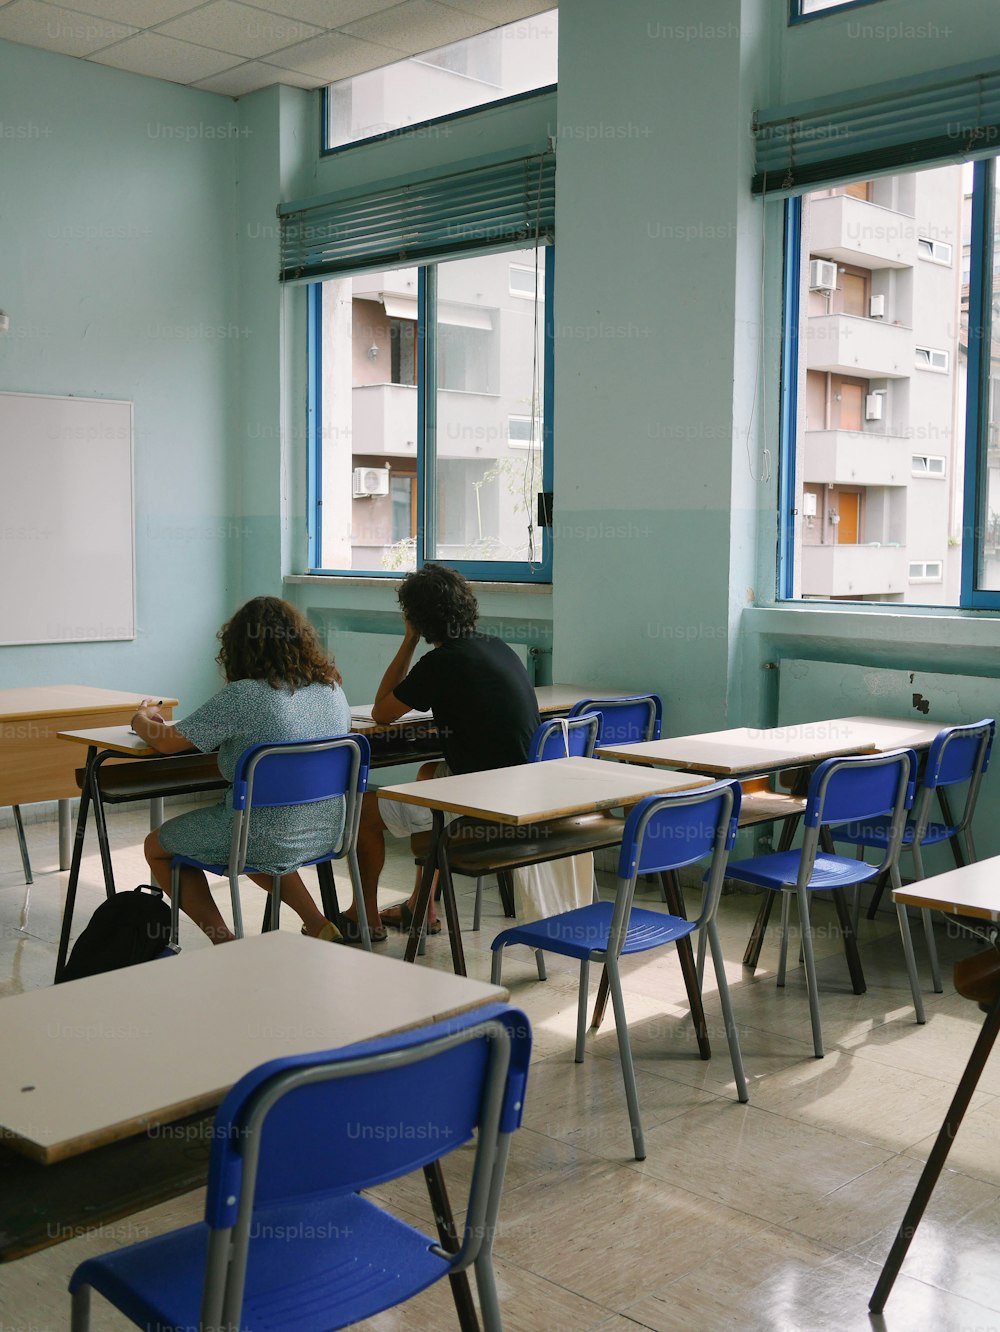 a couple of people sitting at desks in a classroom